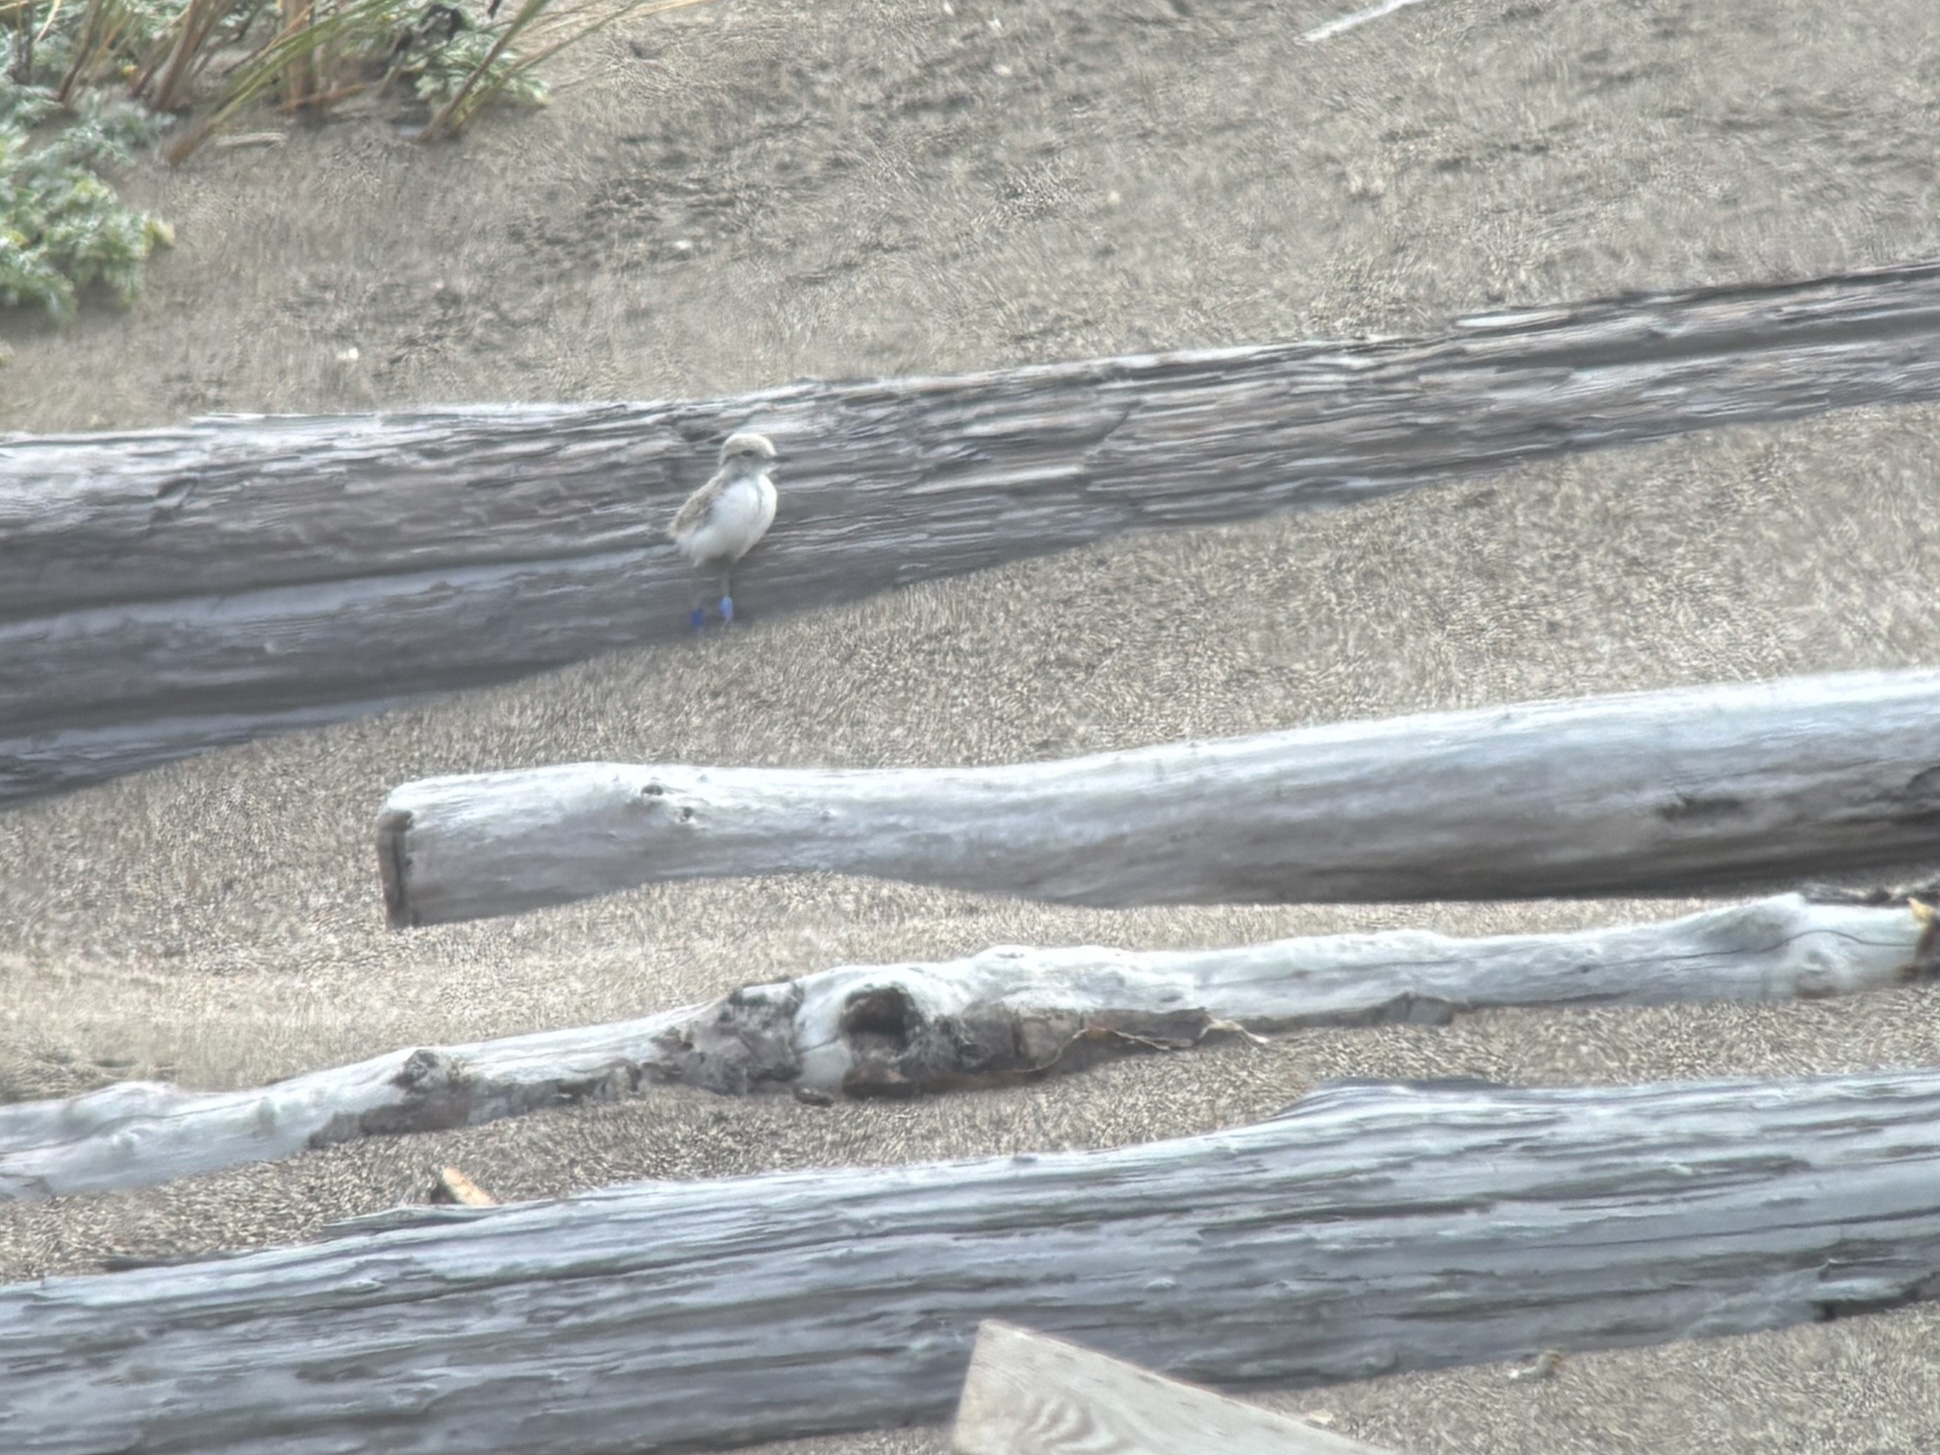 A photo of a small grayish-brown shorebird standing on a sandy beach among moderate-sized pieces of driftwood